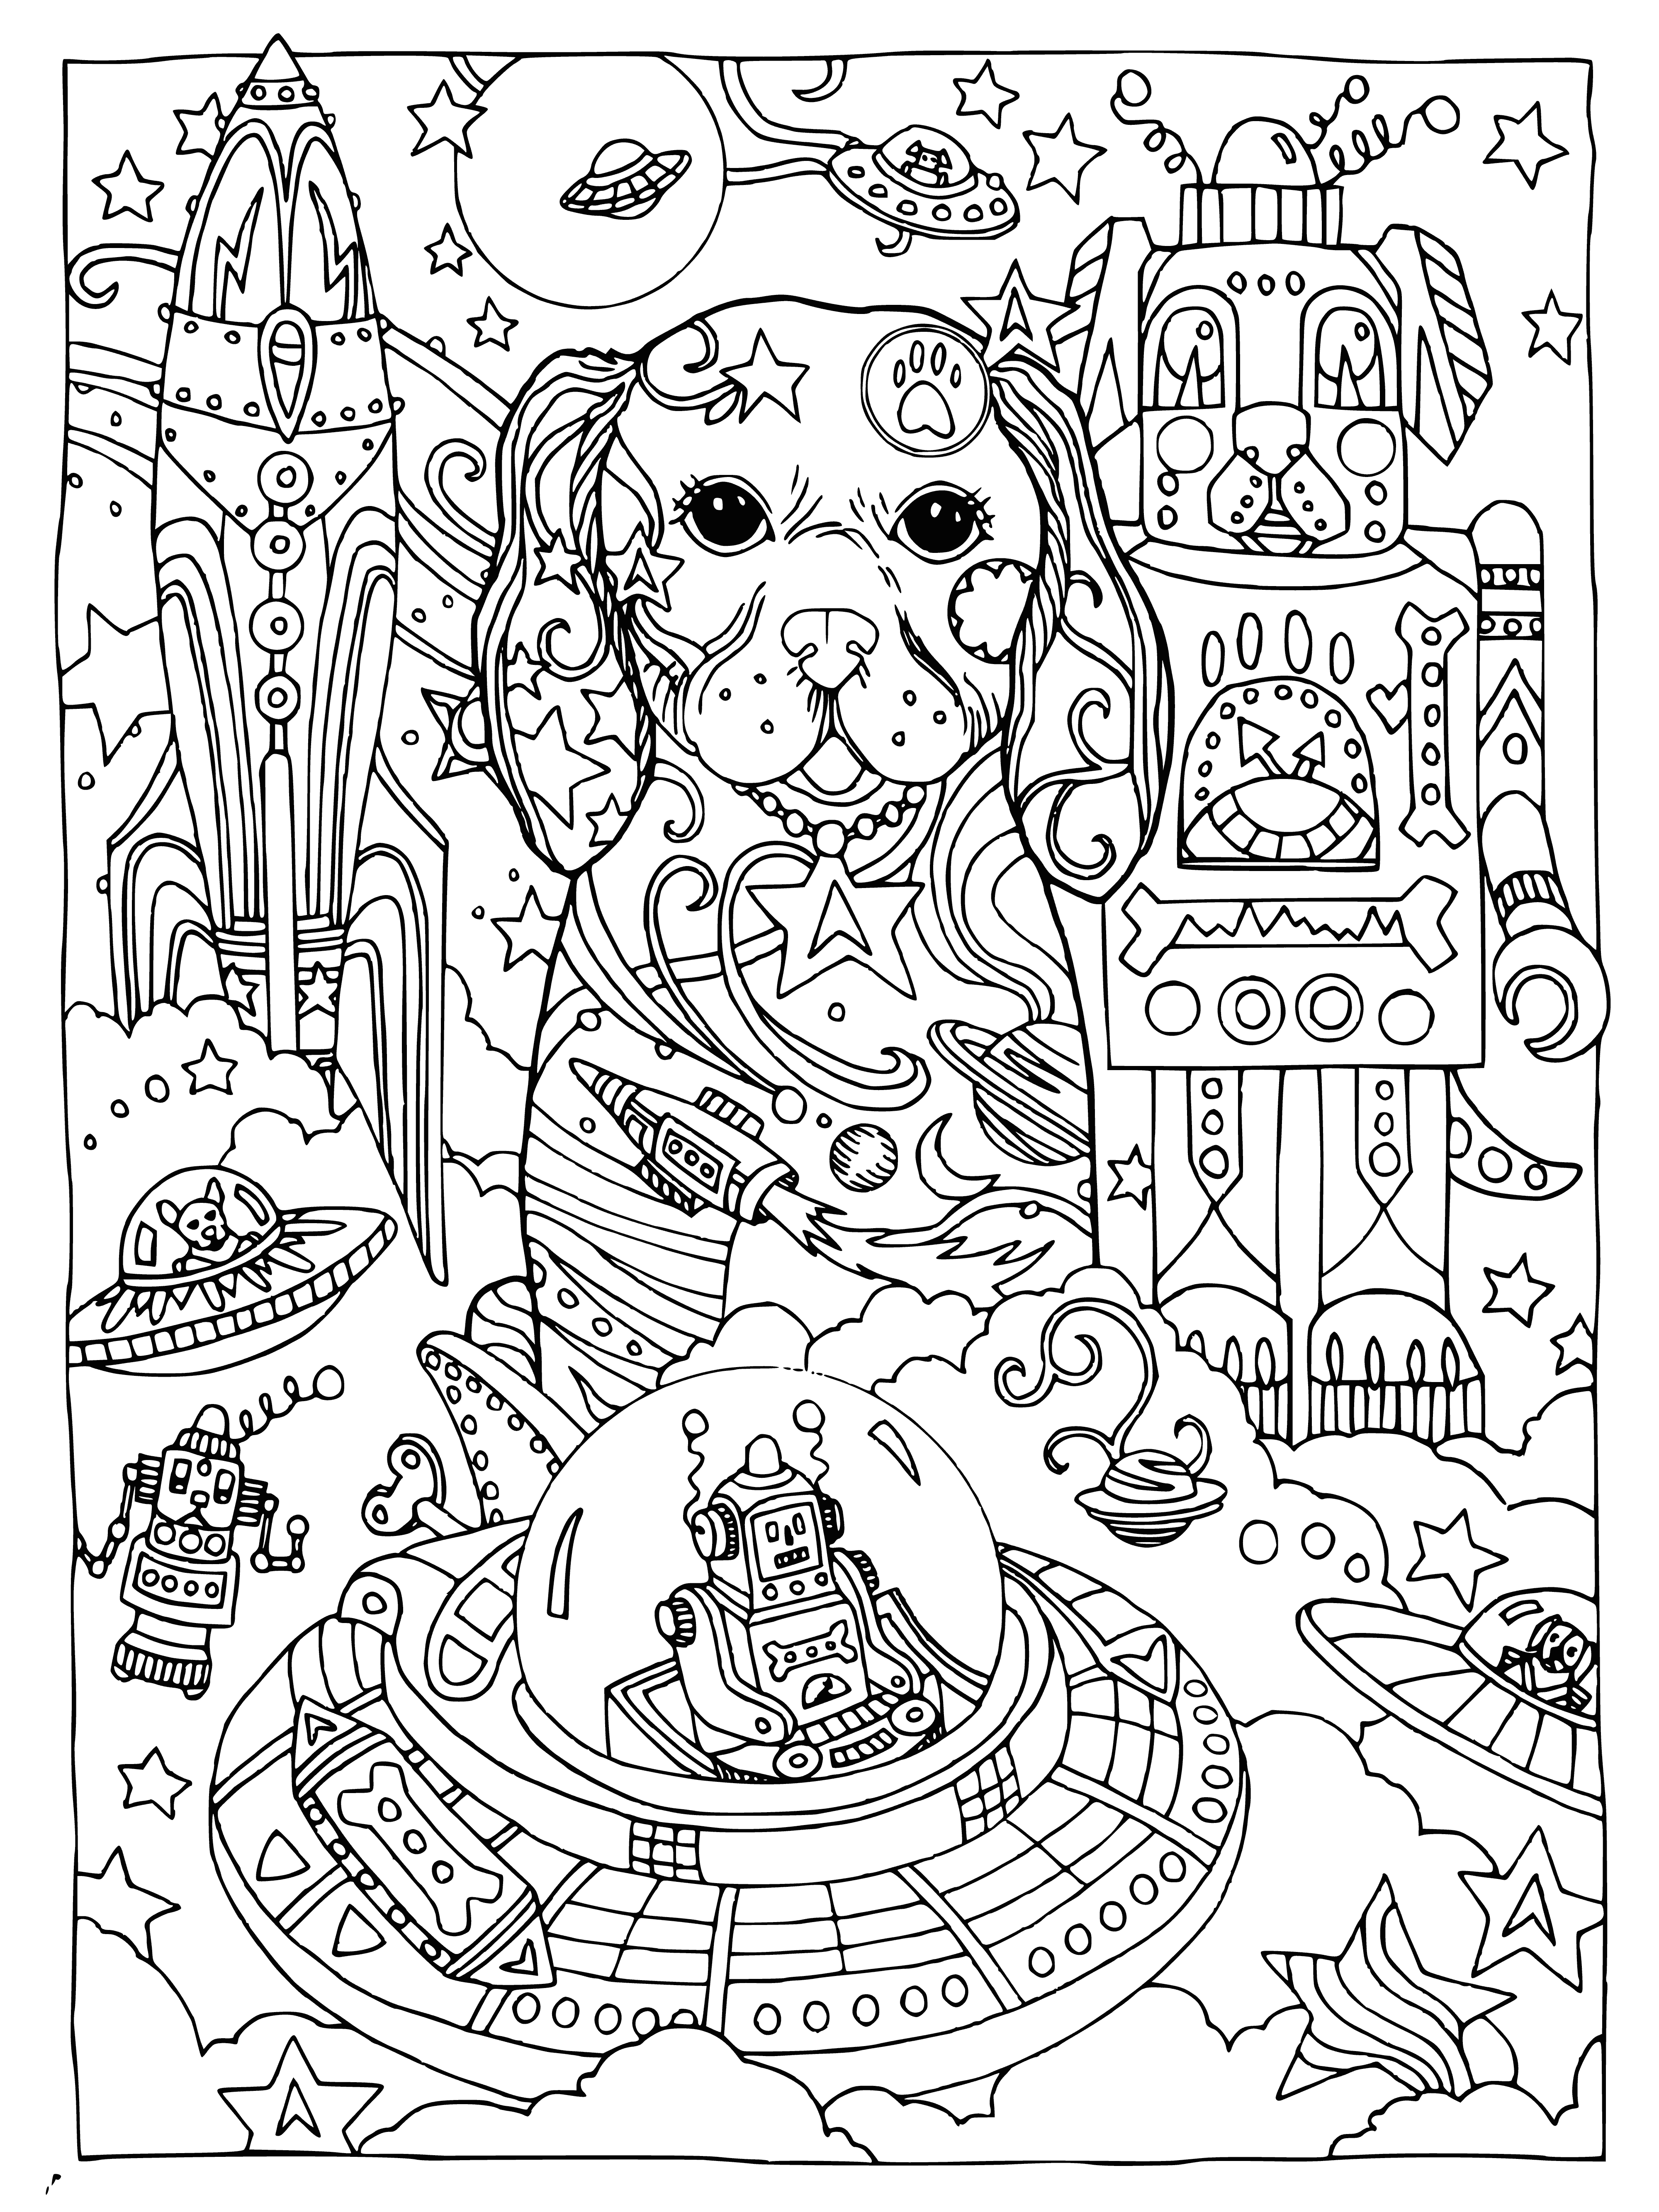 Dog and robots coloring page